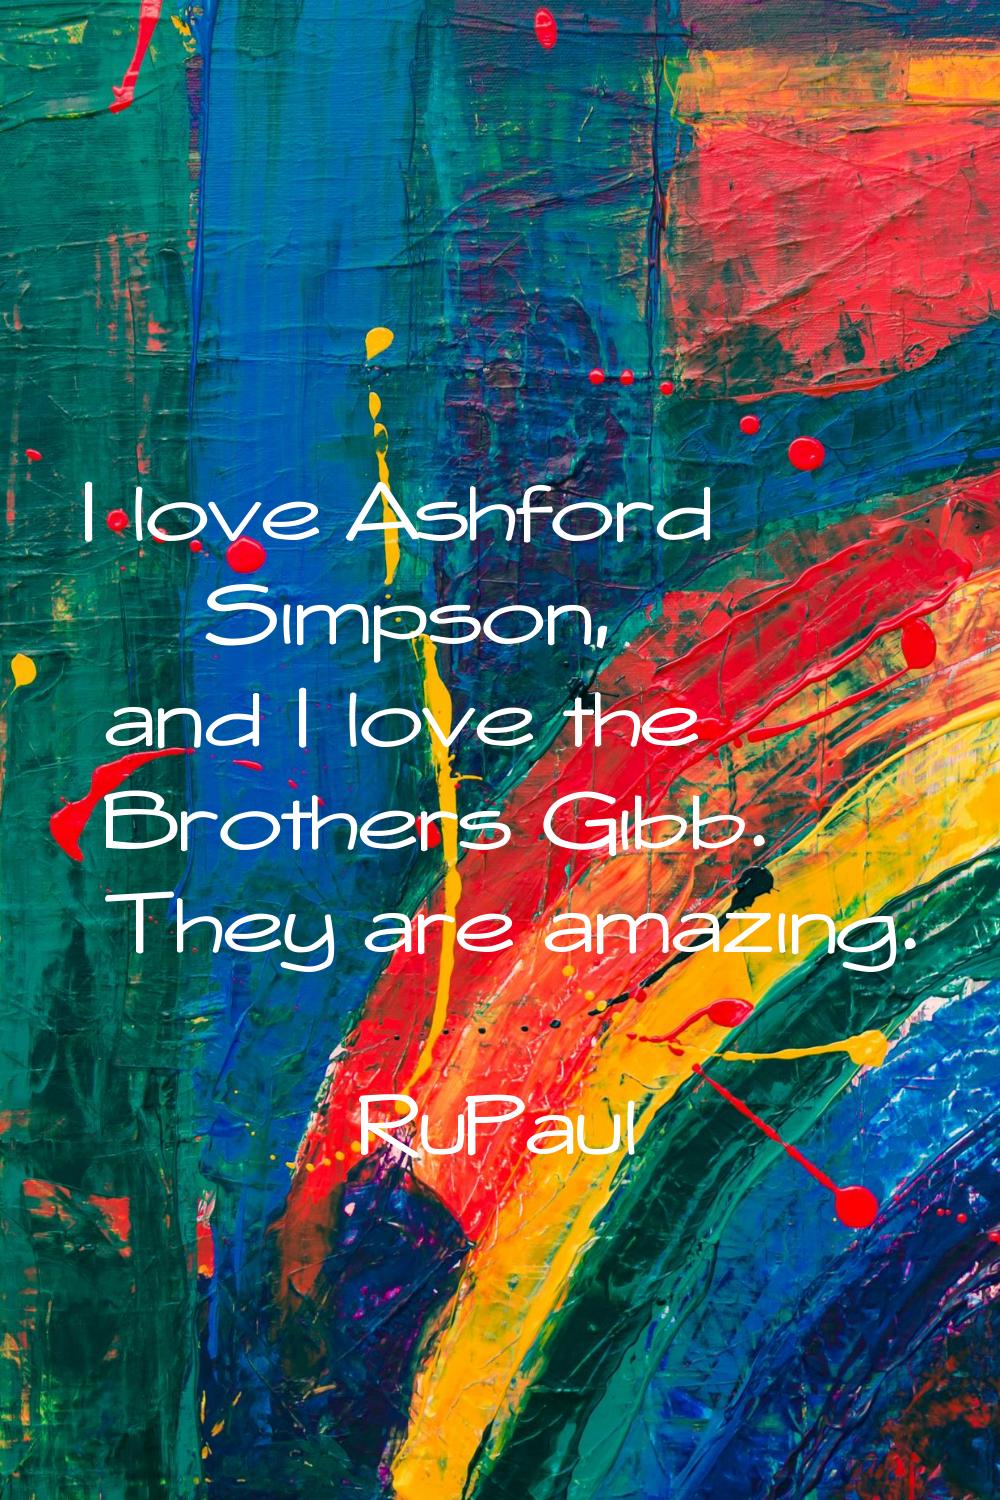 I love Ashford & Simpson, and I love the Brothers Gibb. They are amazing.